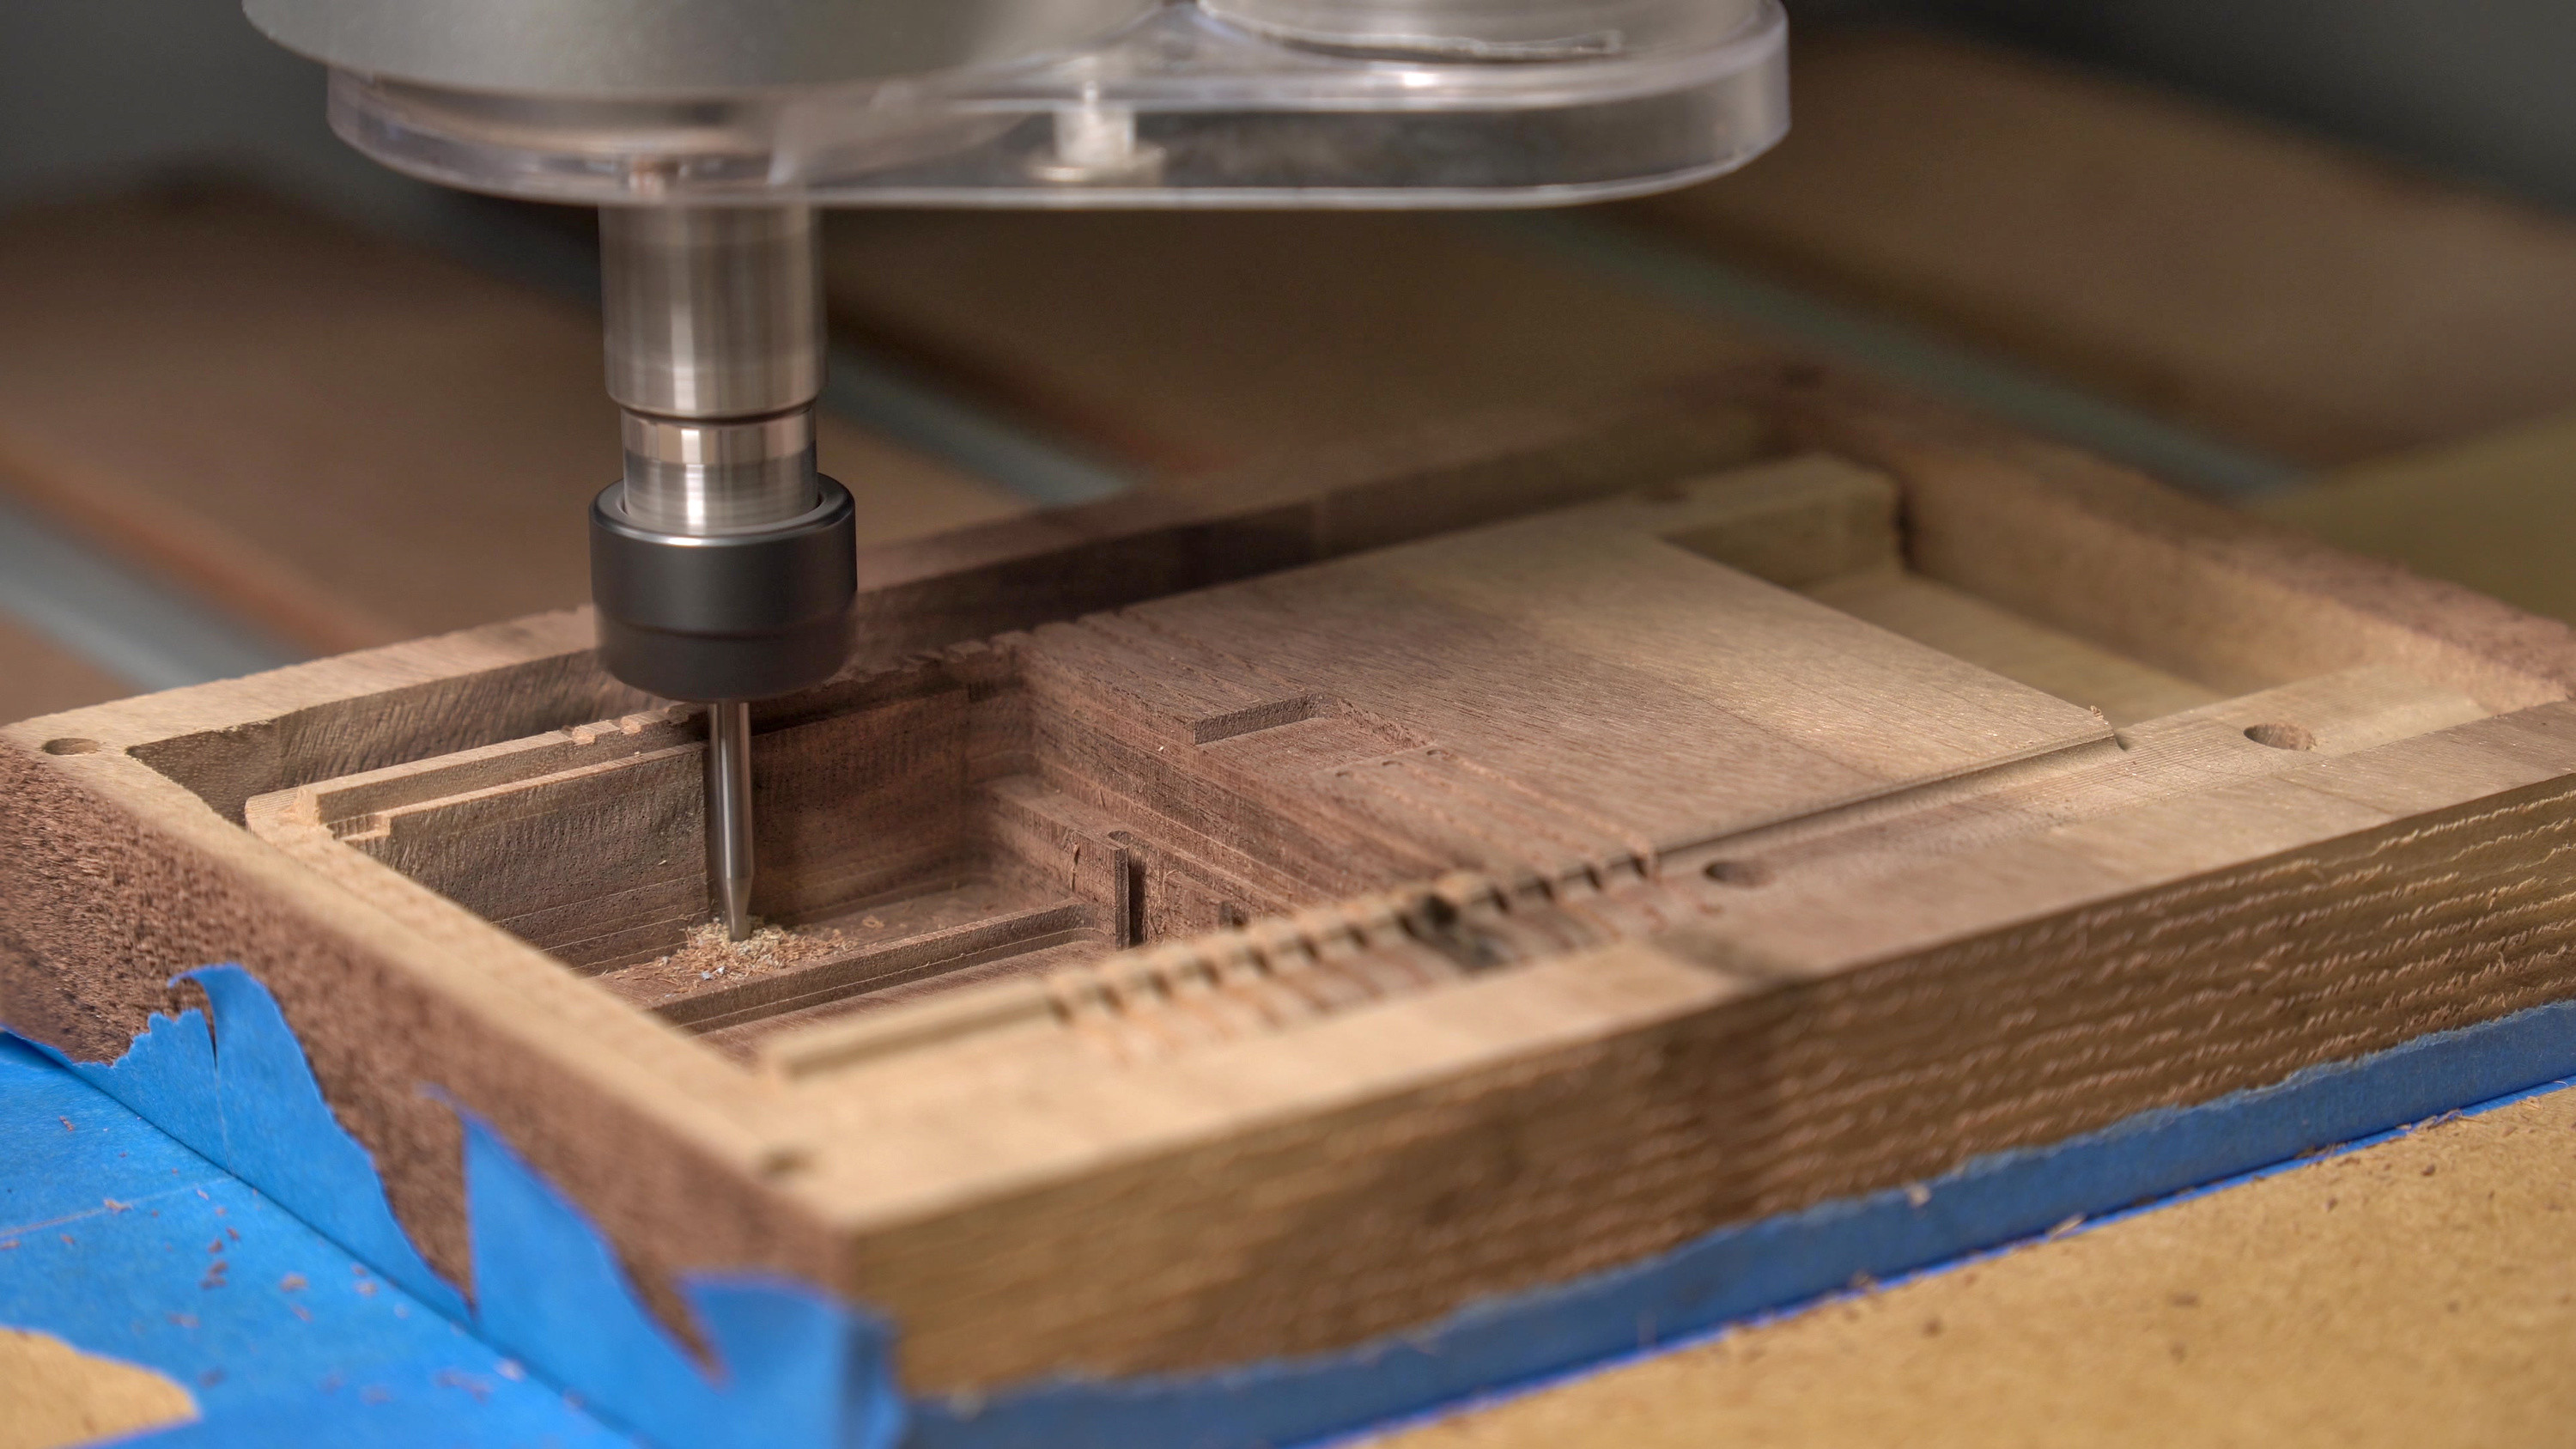 Photo of the CNC machining process. A block of wood on the wooden bed of a CNC router is already showing the recognizable design of the backside of a Game Boy. A spinning fine end mill is drilling into a part of the battery compartment. The wood is noticably brighter than the finished Game Boy as it has not yet been oiled.